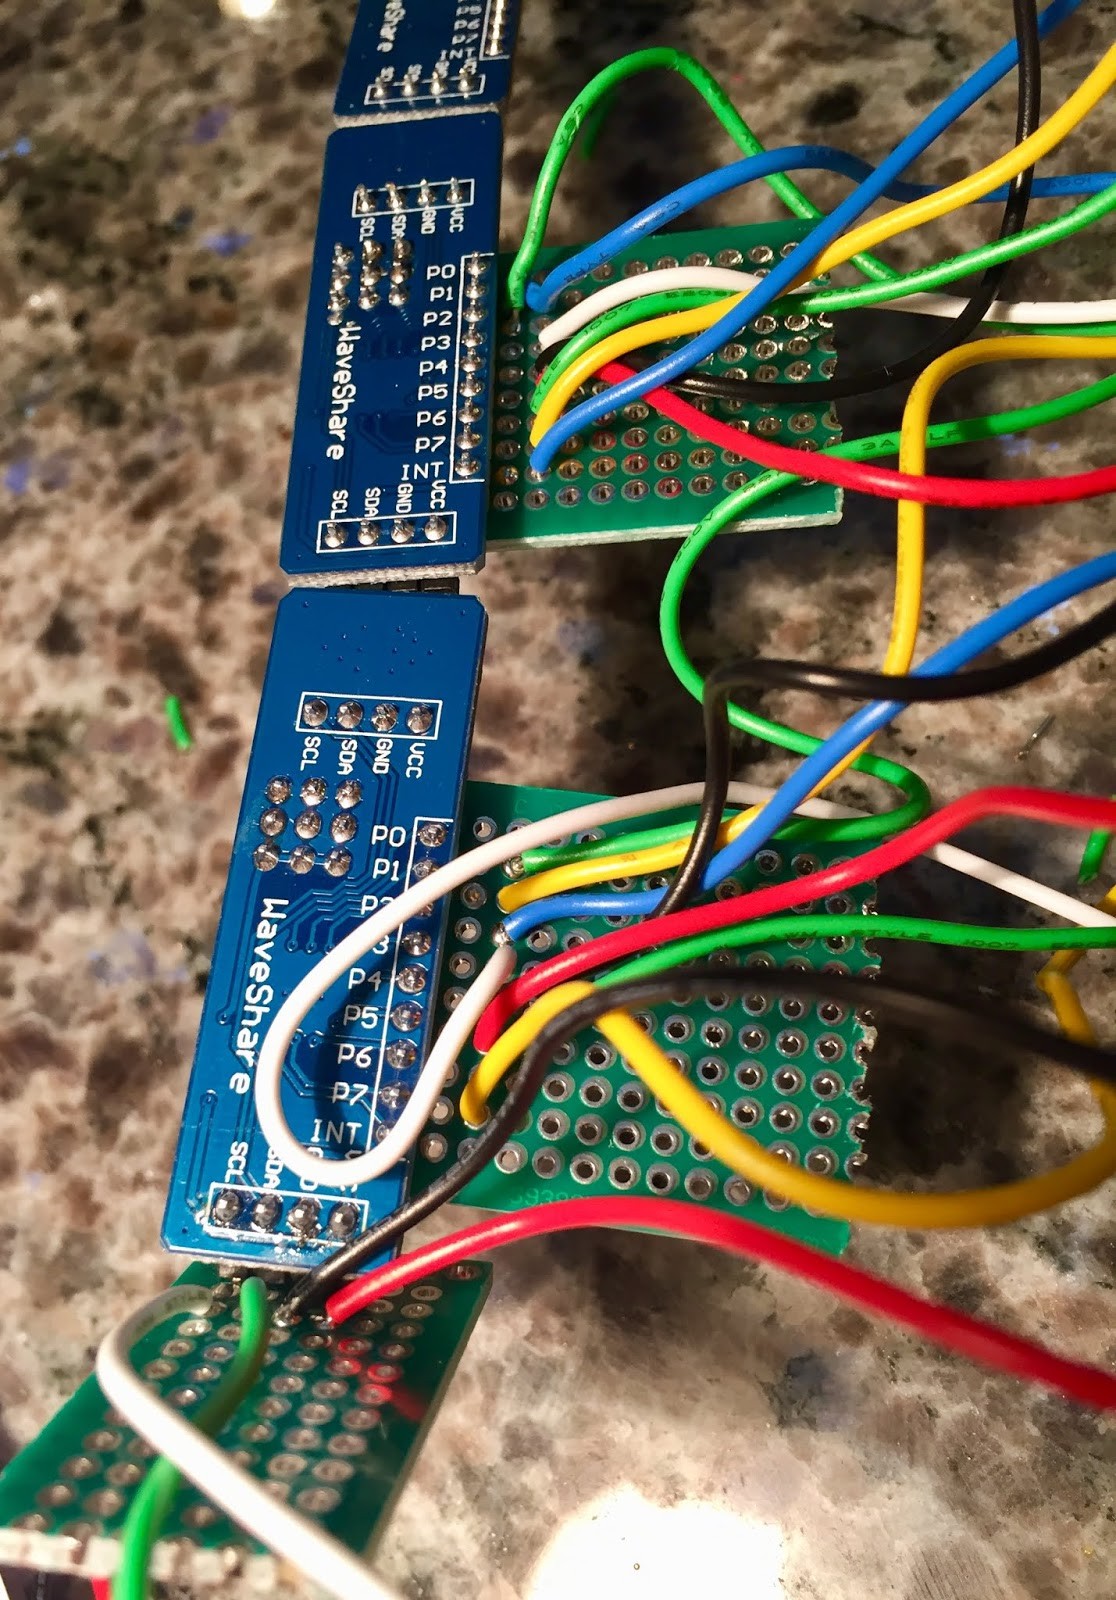 I2C chain of I O expander boards to drive LEDs and record some inputs